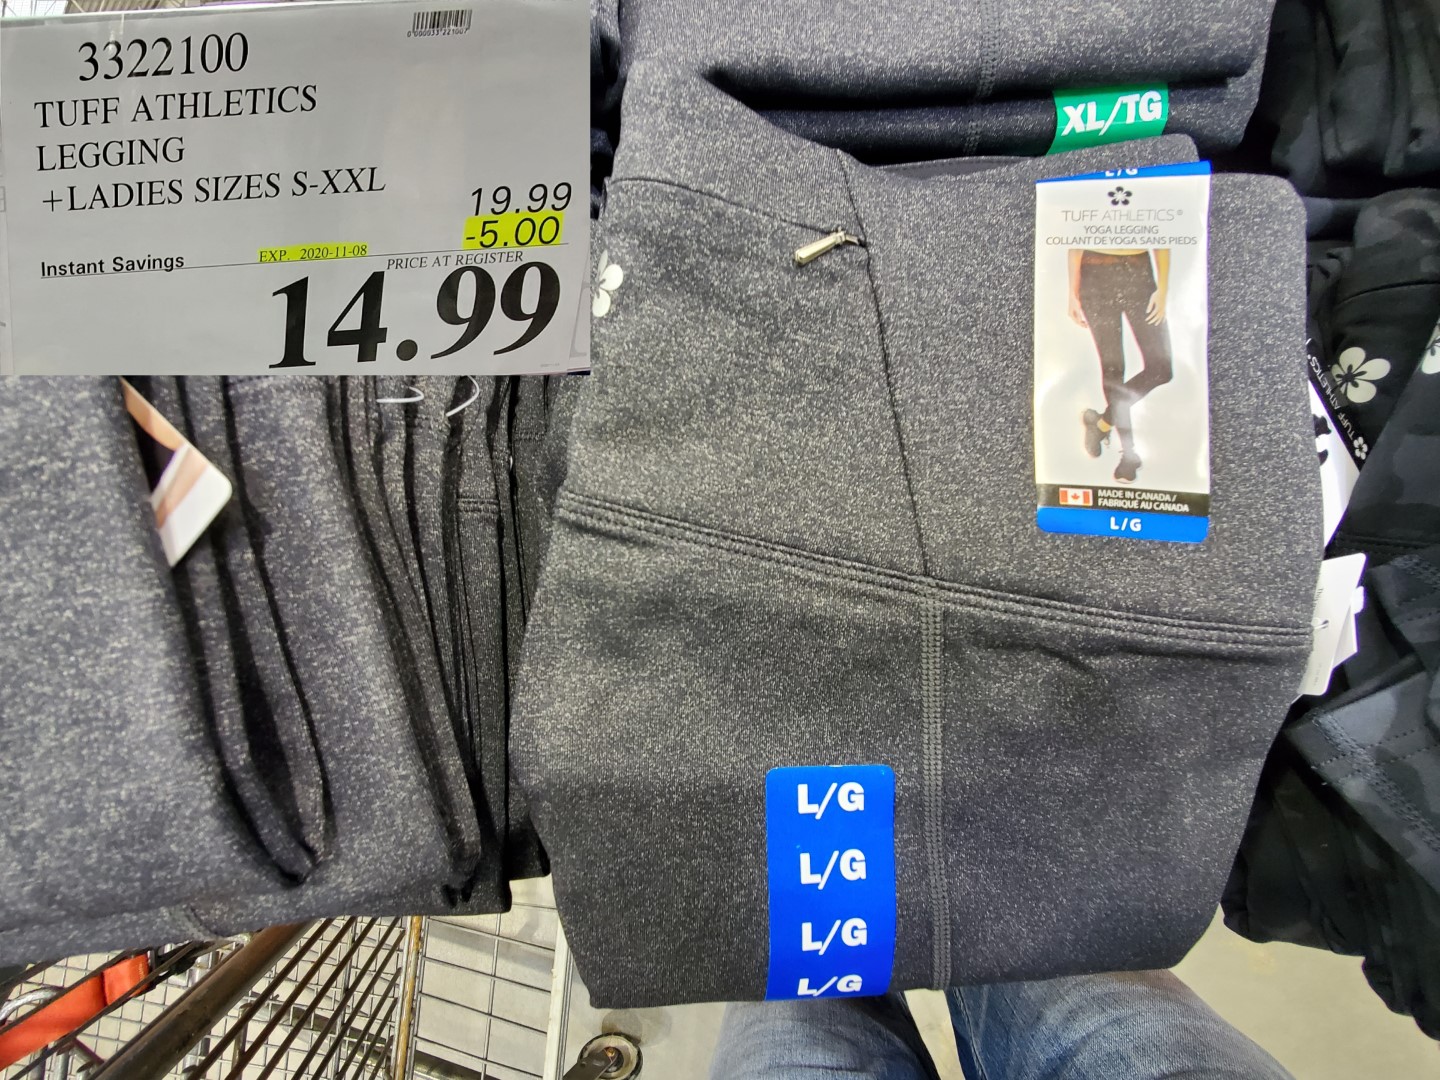 Tuff Athletics Women's Yoga Pant with Pockets offer at Costco